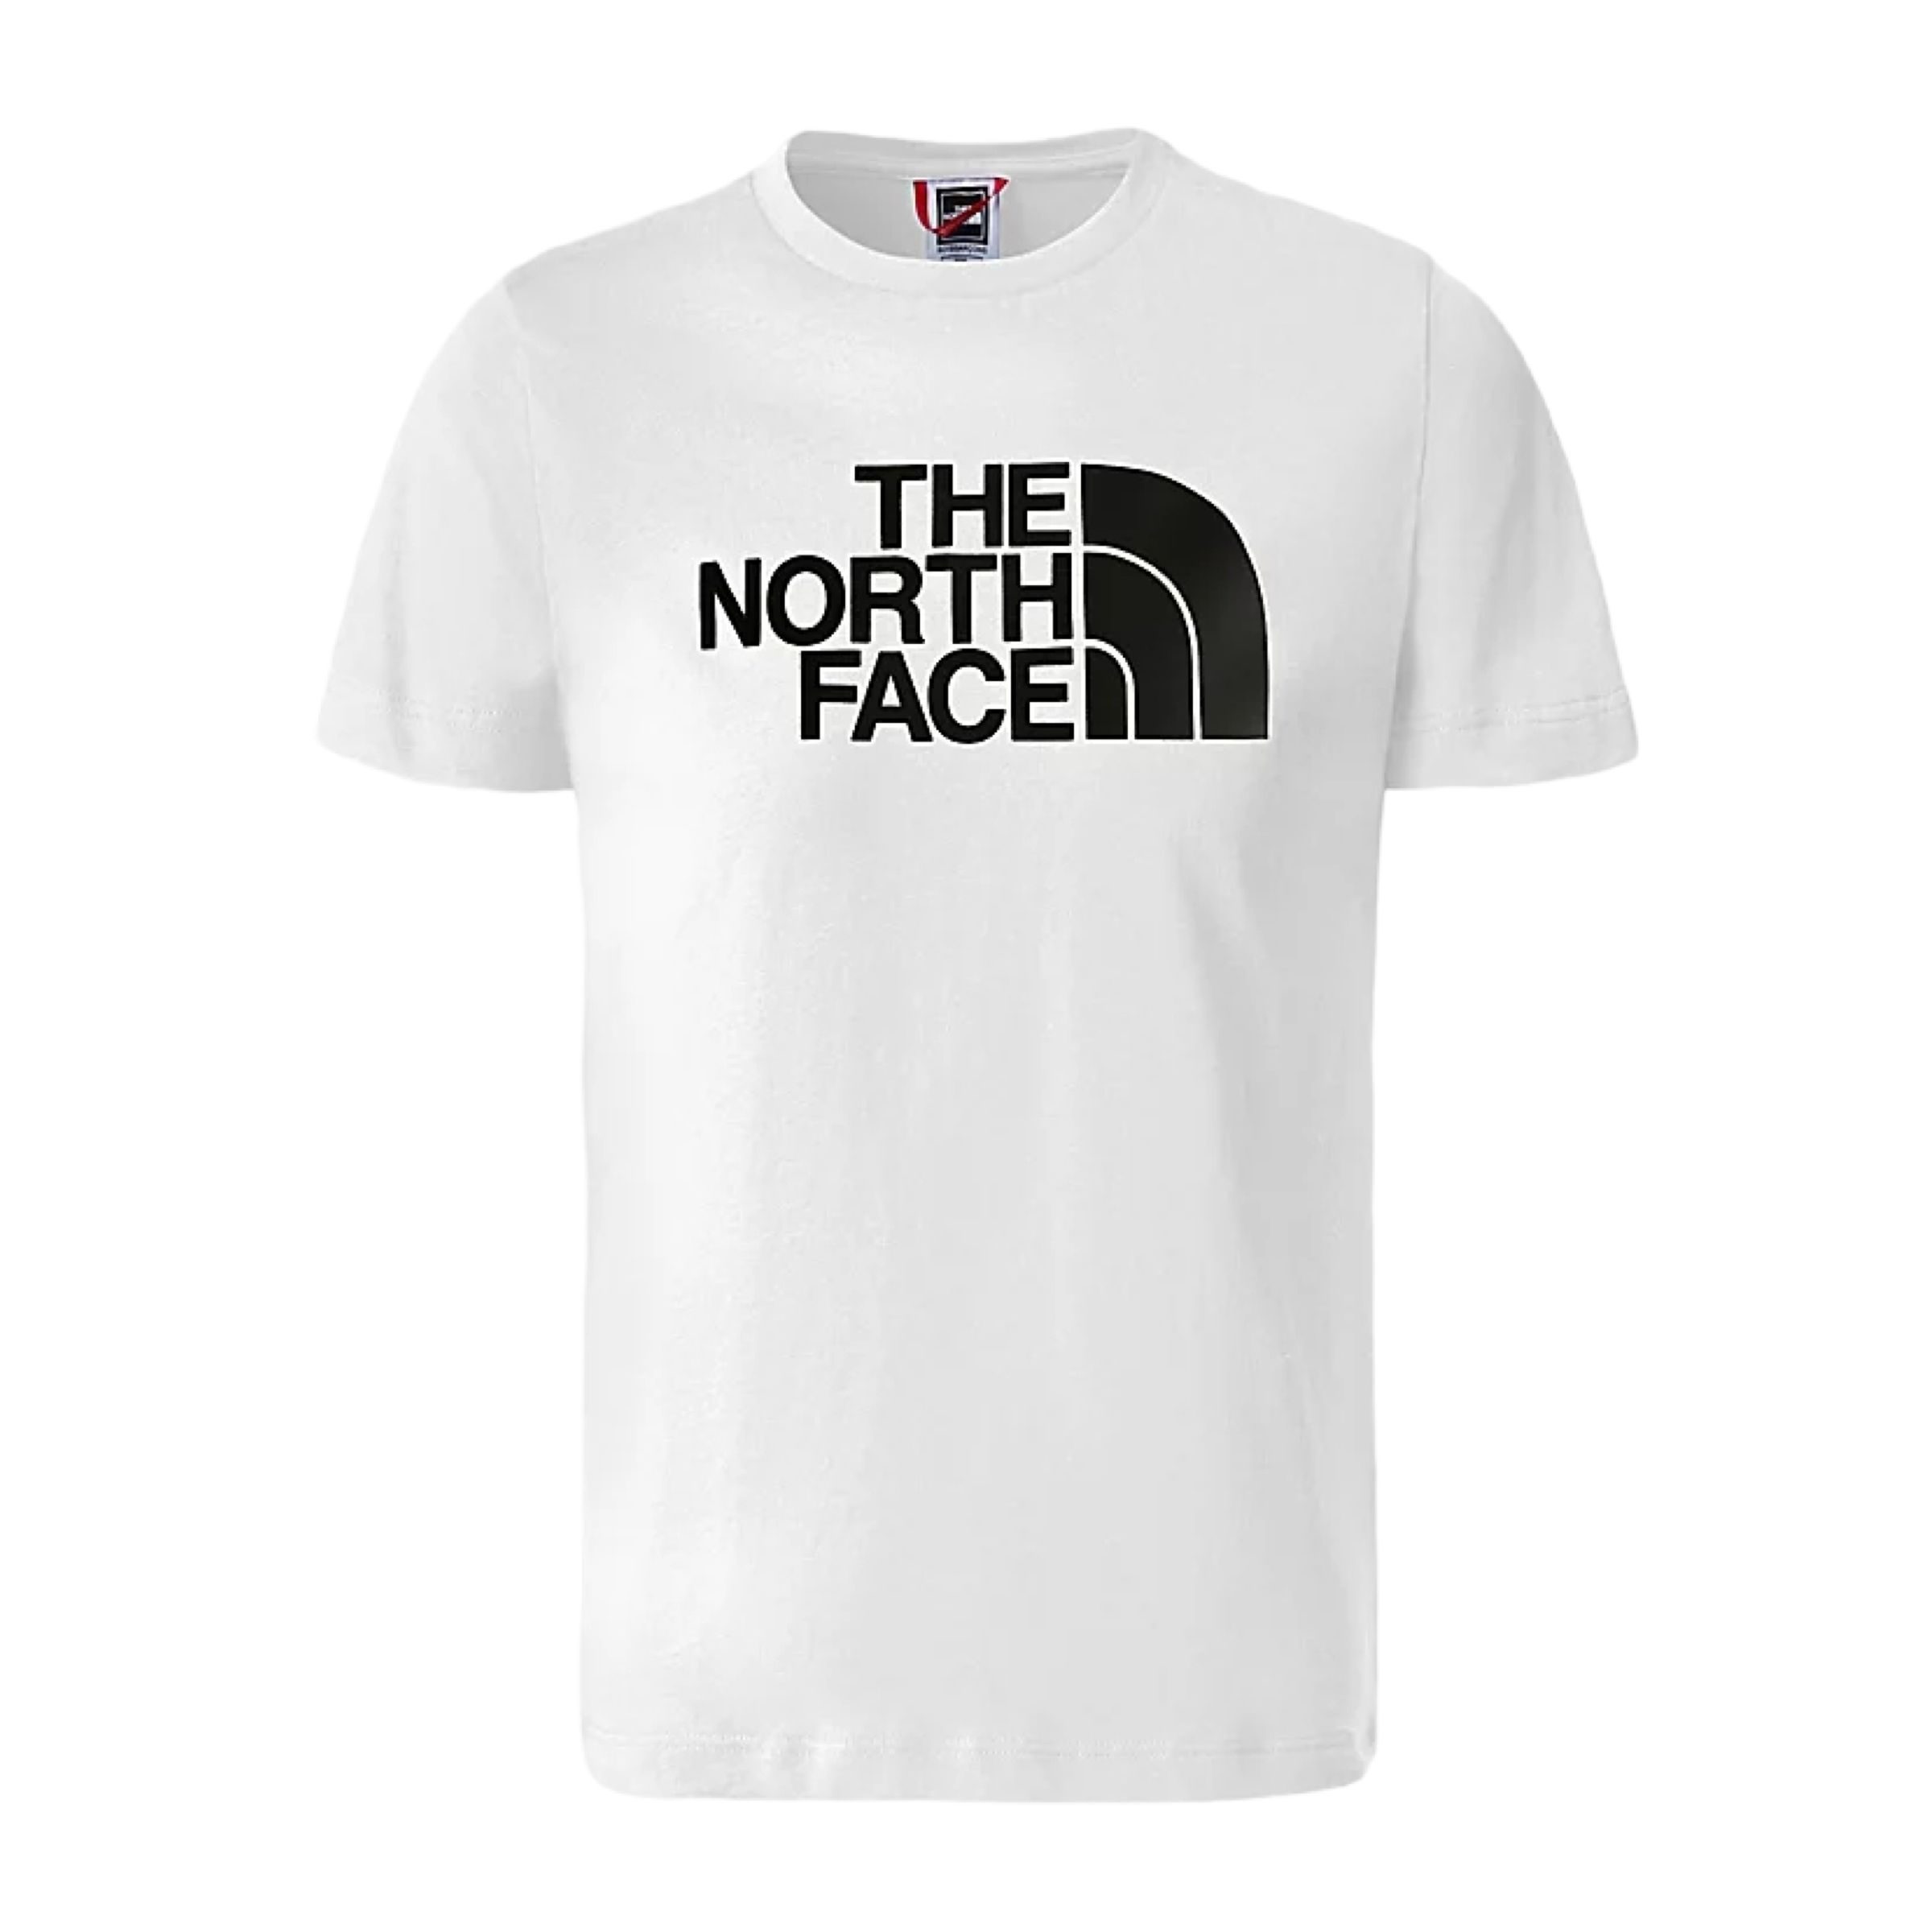 The North Face  White and Black Easy Bambino T Shirt 